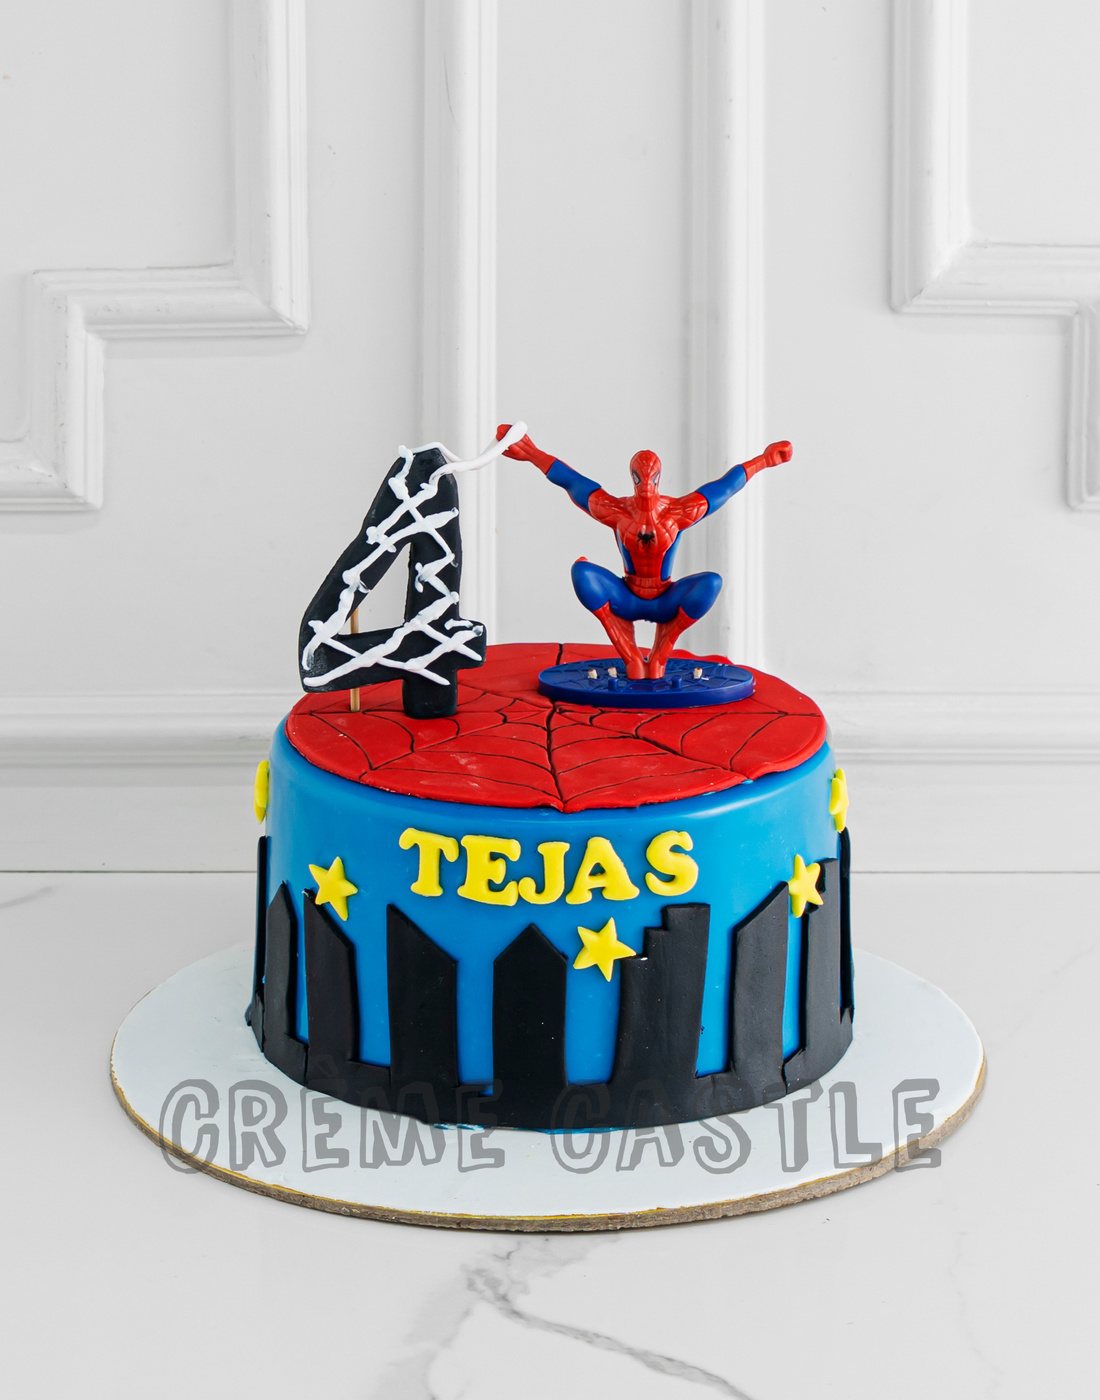 5 Number Spiderman Theme Cake Delivery in Delhi NCR - ₹5,999.00 Cake Express